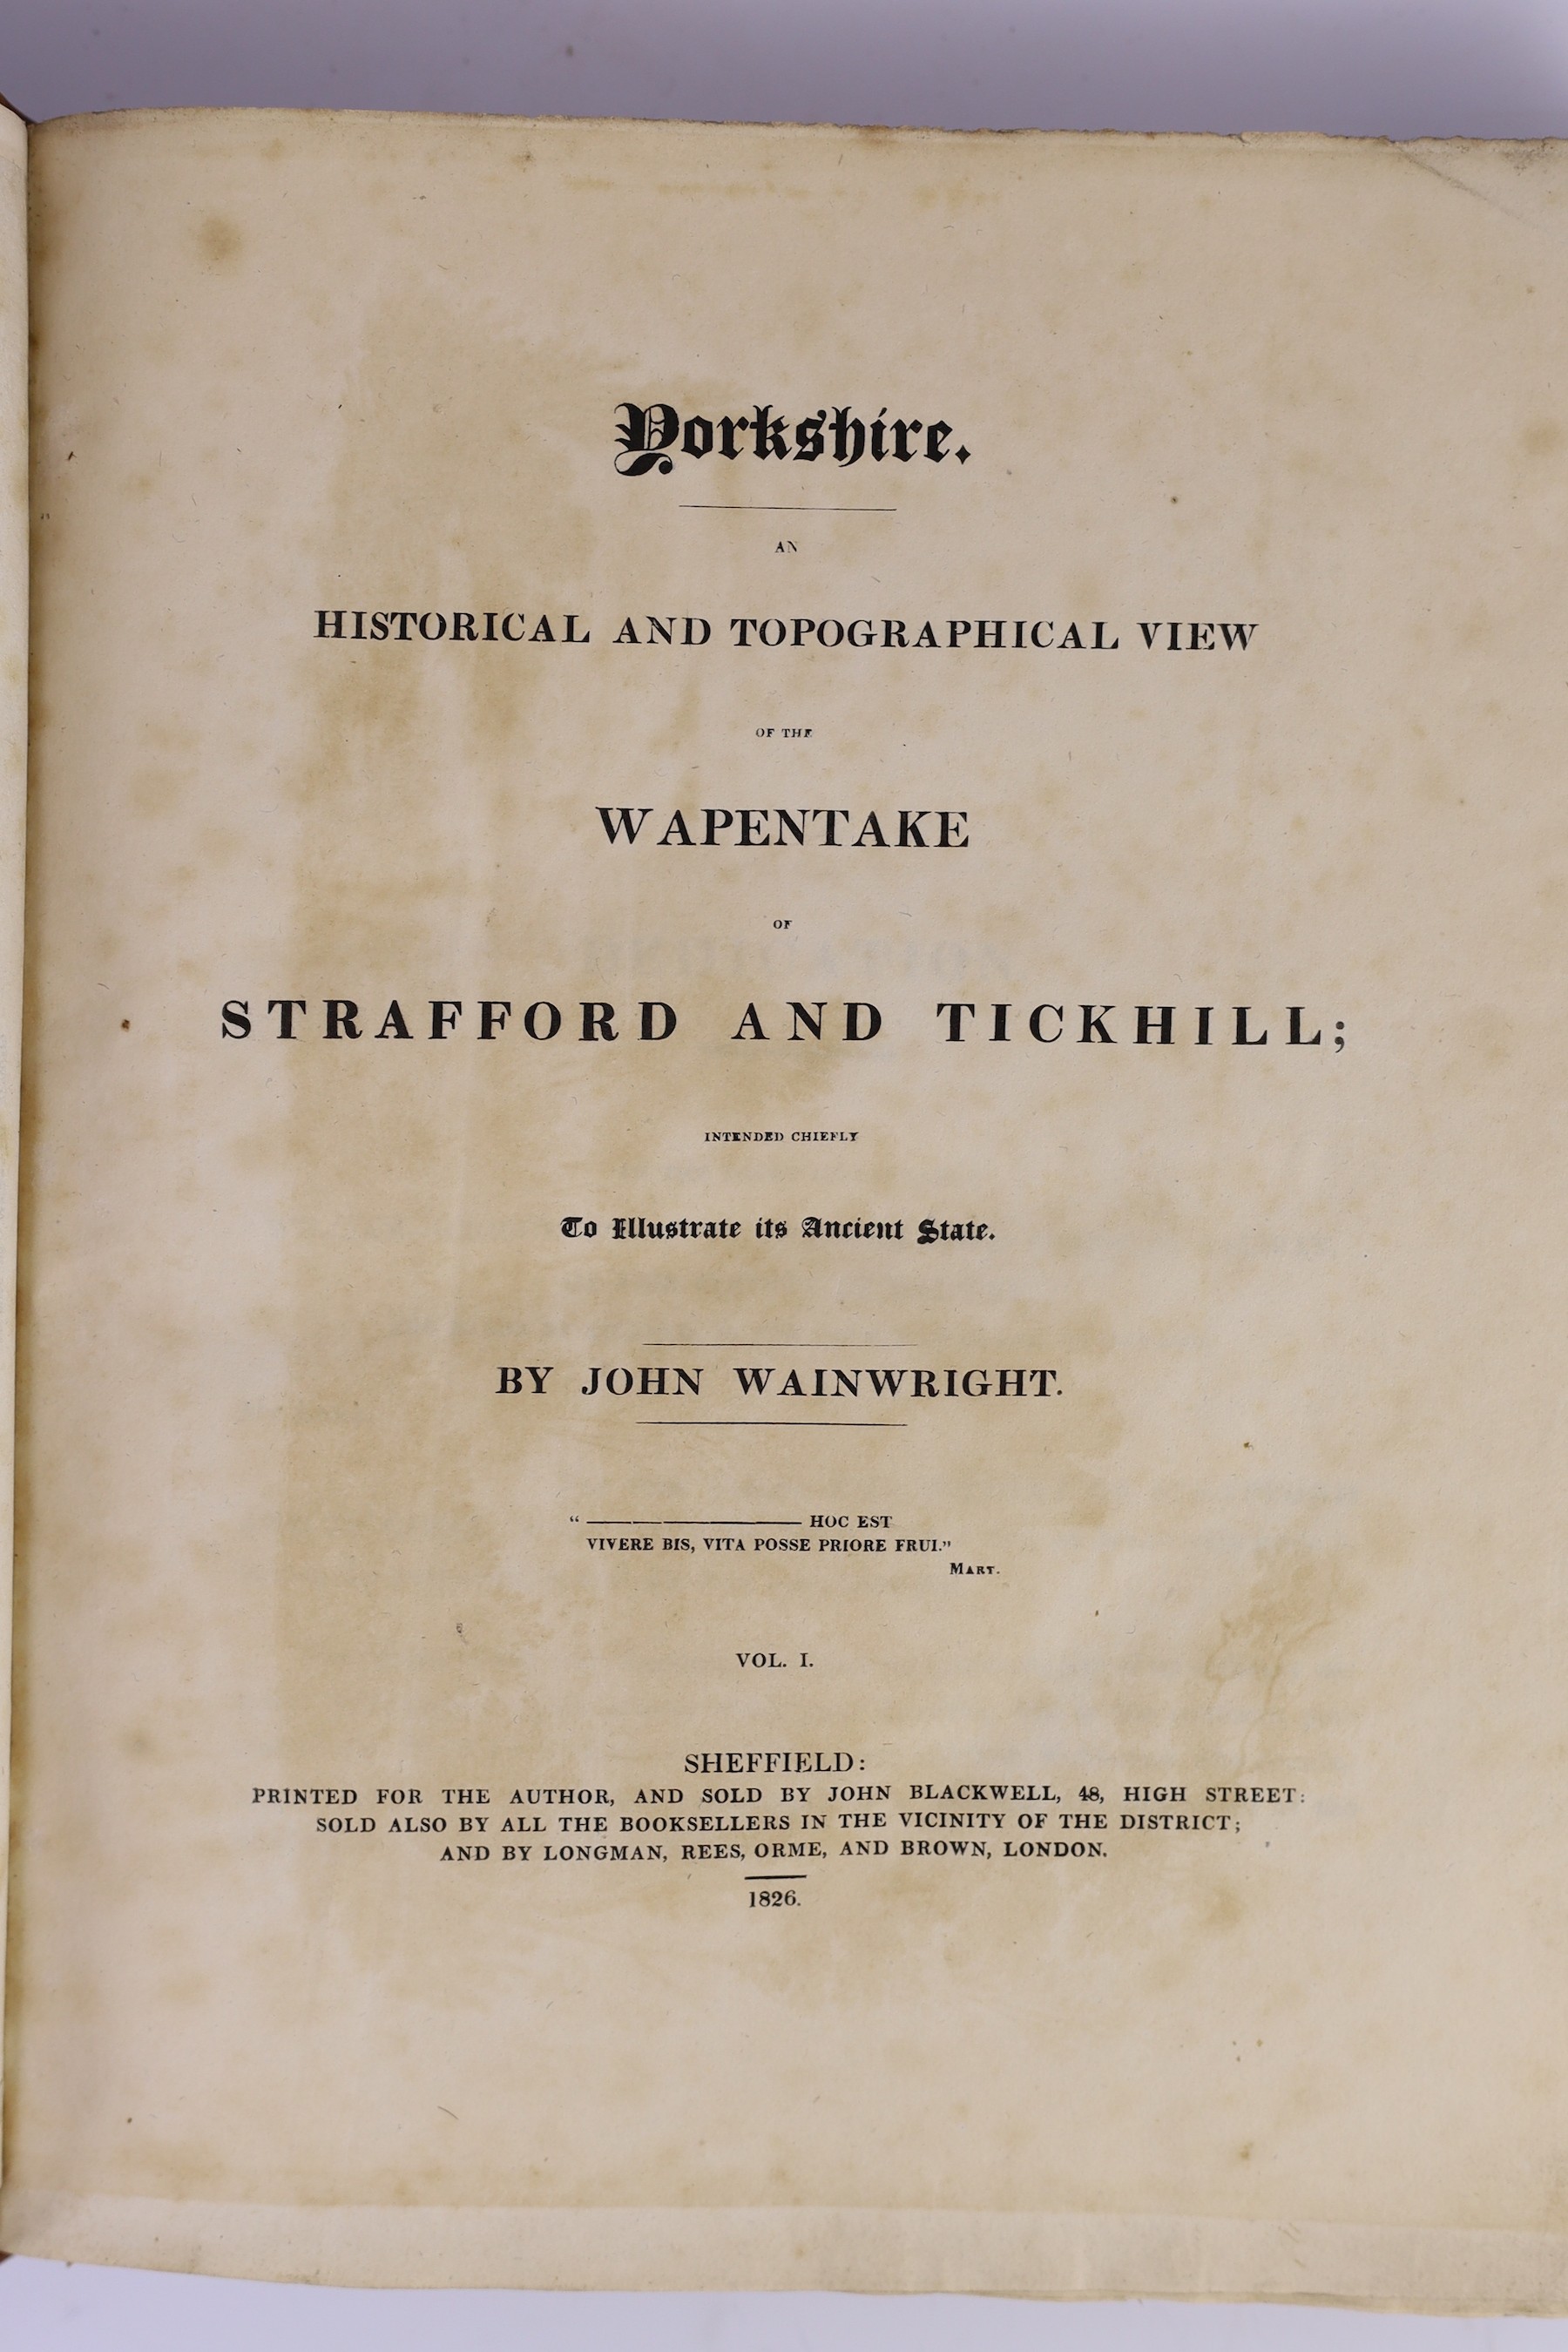 YORKSHIRE - Wainwright, John - Yorkshire. An Historical and Topographical View of the Wapentake of Stafford and Tickhill, 4to, rebound half calf, with engraved frontis and 3 plates, Sheffield, 1826 and Graves, John, Rev.